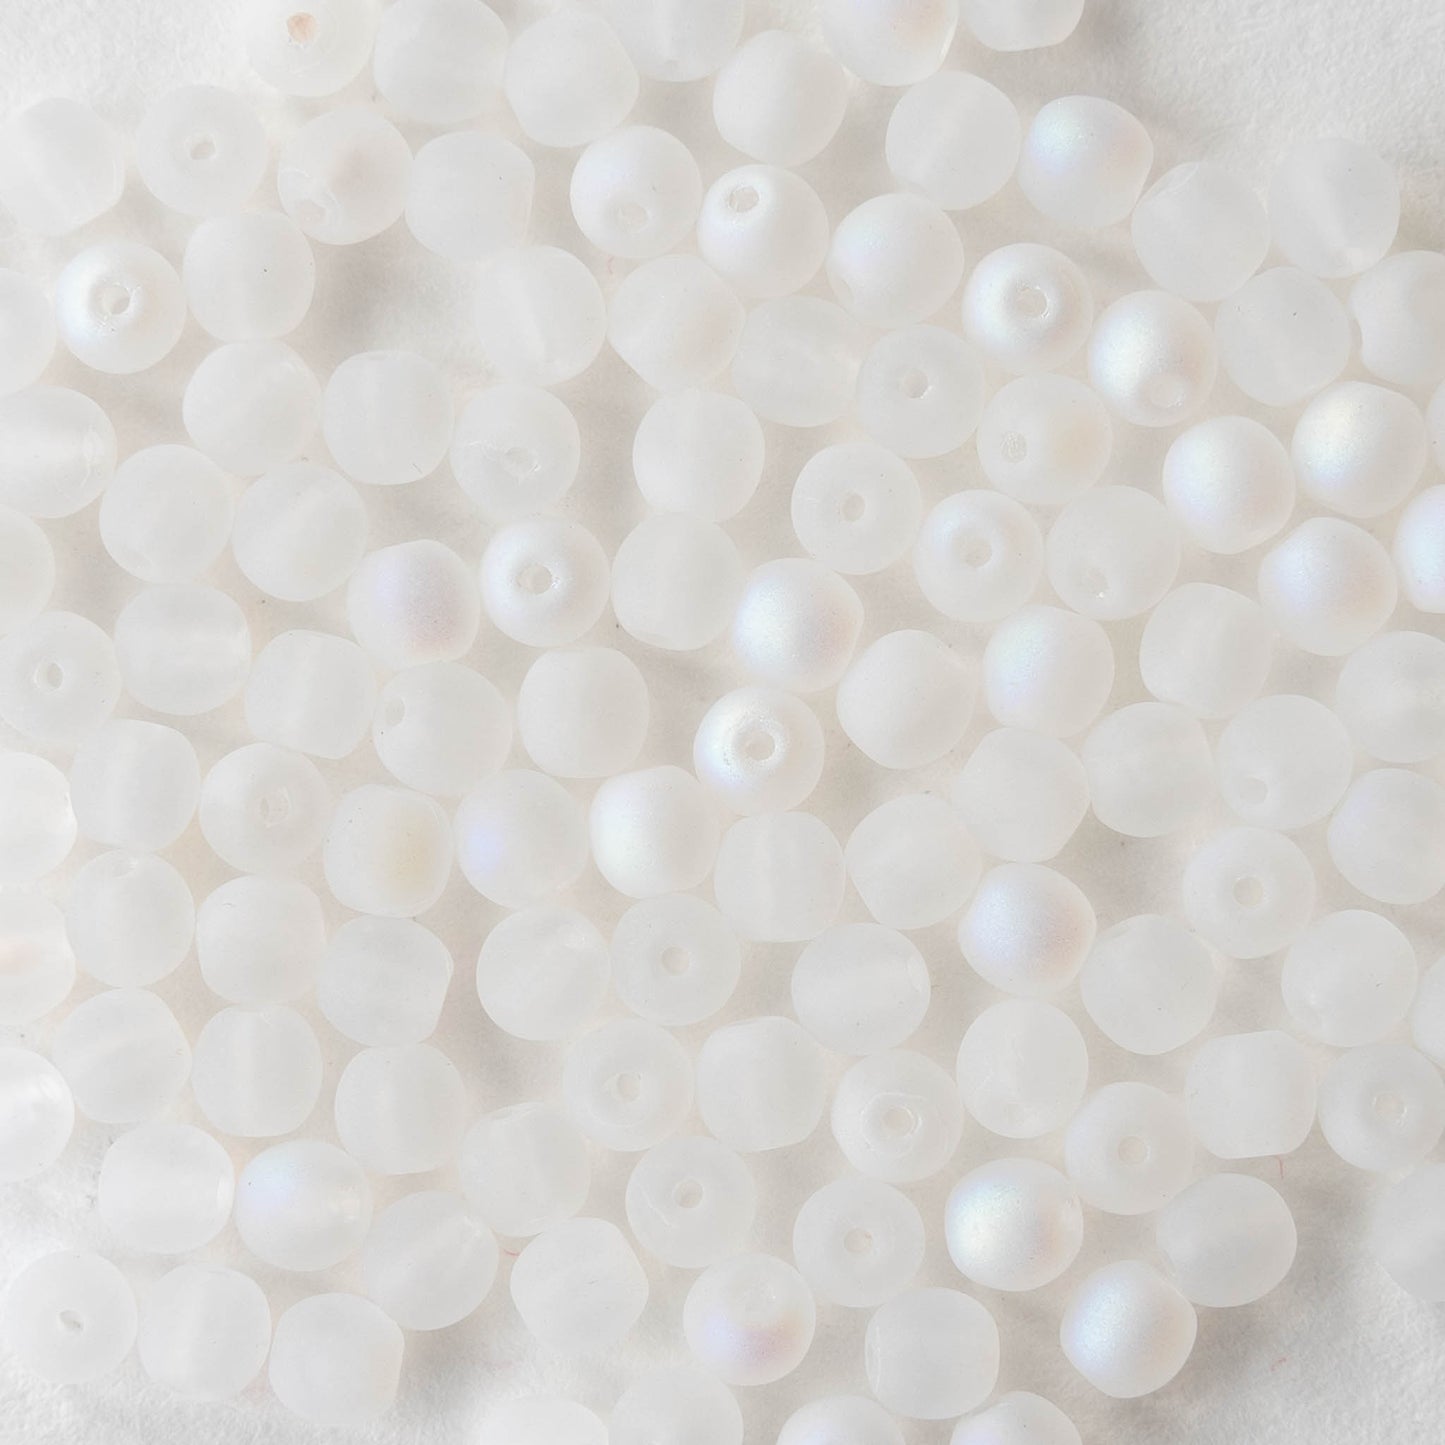 4mm Round Glass Beads - Crystal Matte AB - 100 Beads